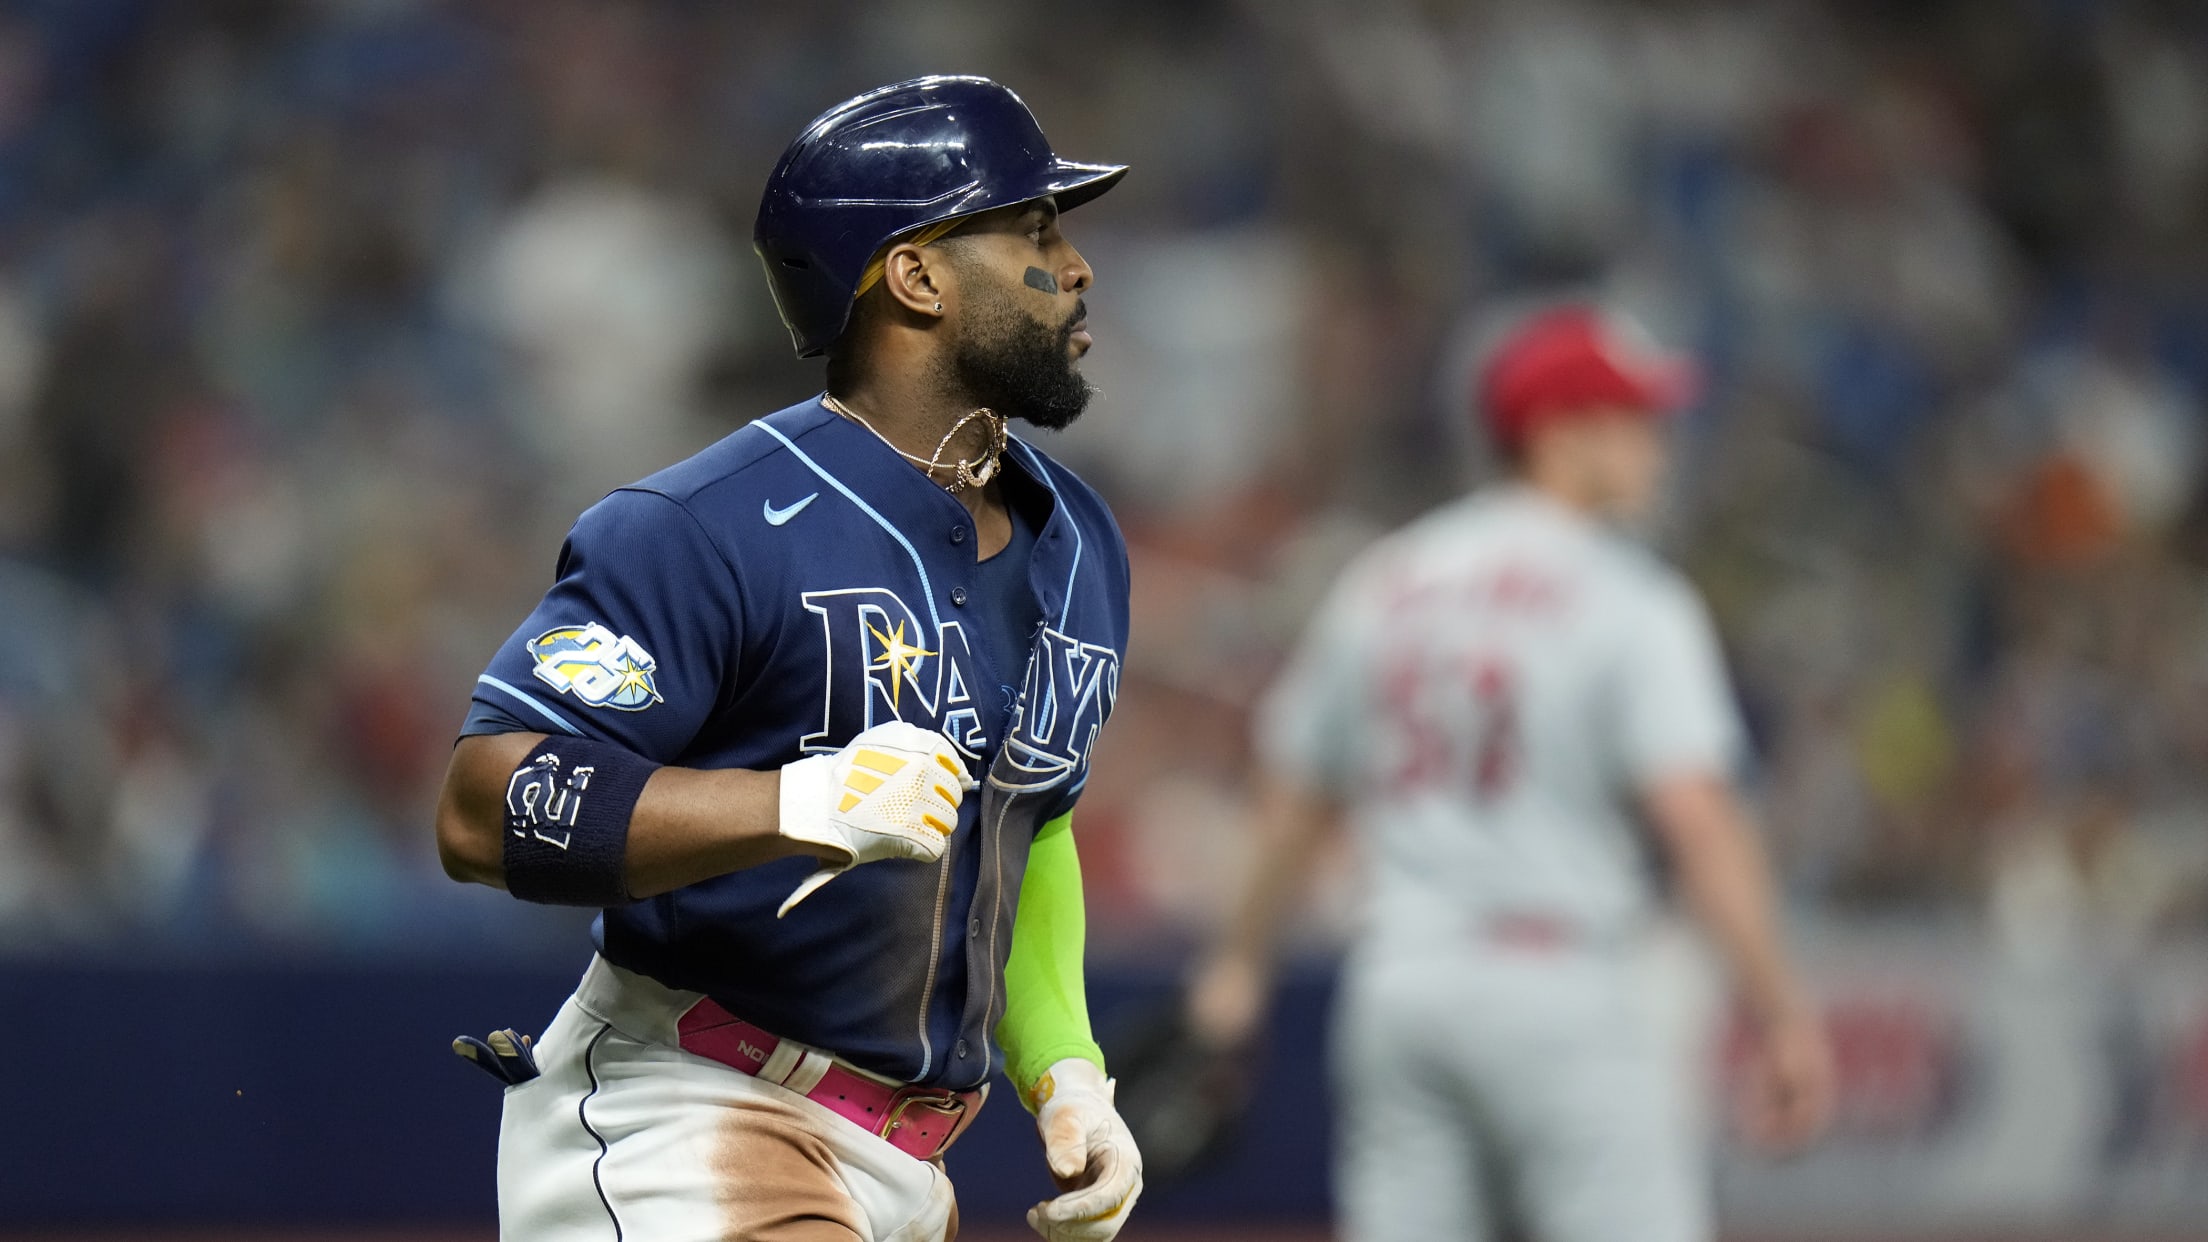 Yandy serenaded on b'day, makes sweet music with bat